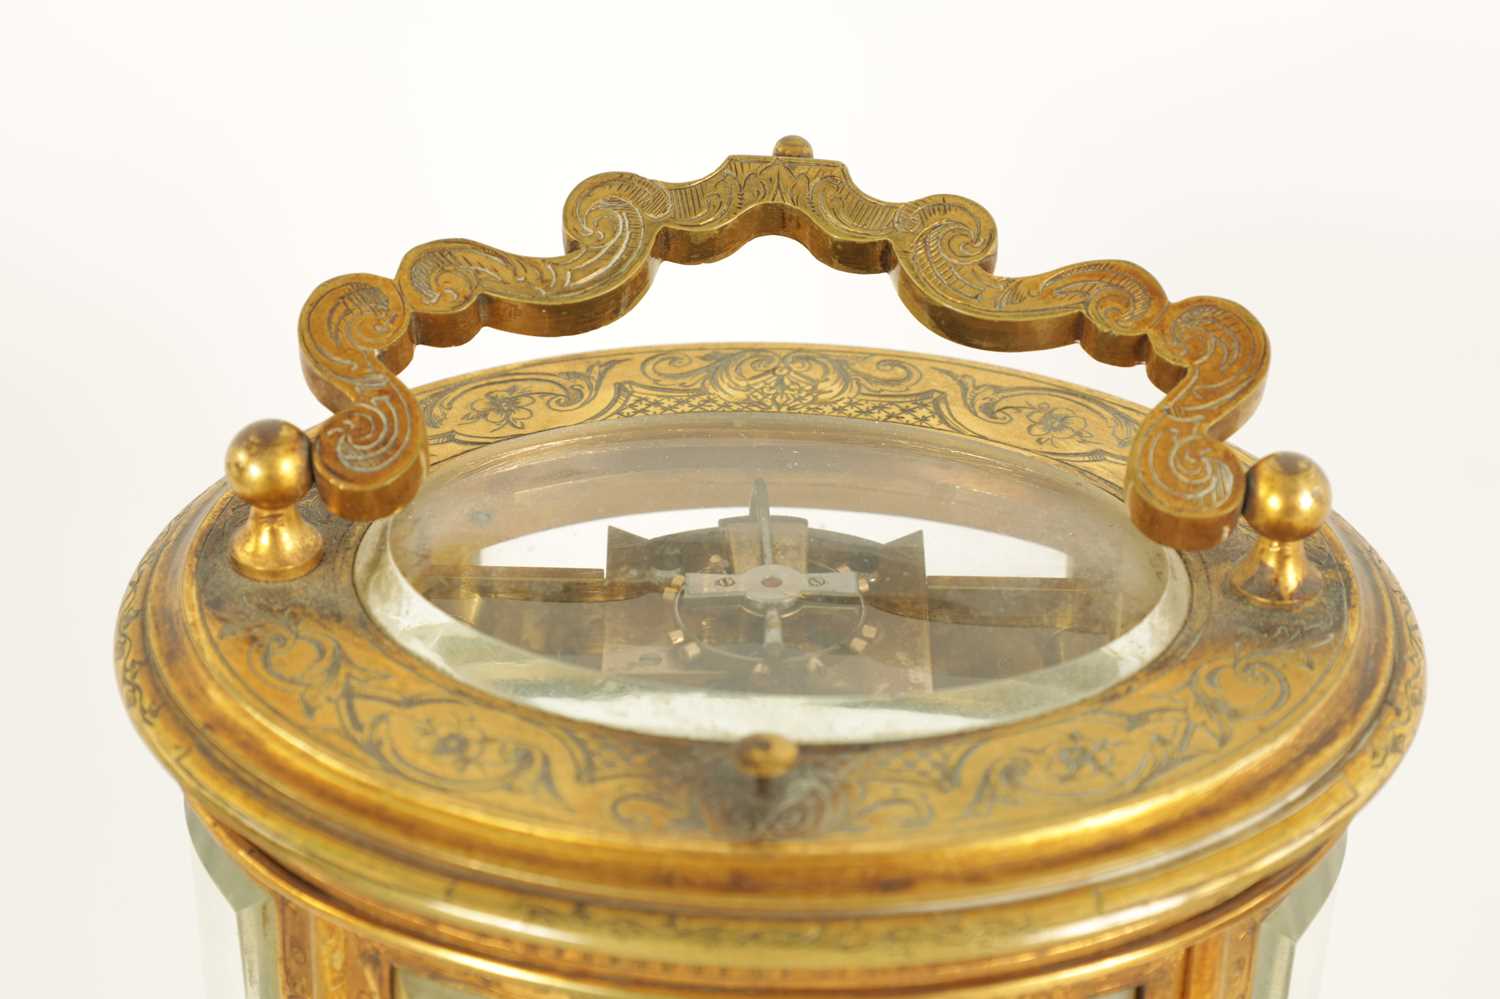 A LATE 19TH CENTURY OVAL ENGRAVED GILT BRASS CARRIAGE CLOCK REPEATER - Image 3 of 9